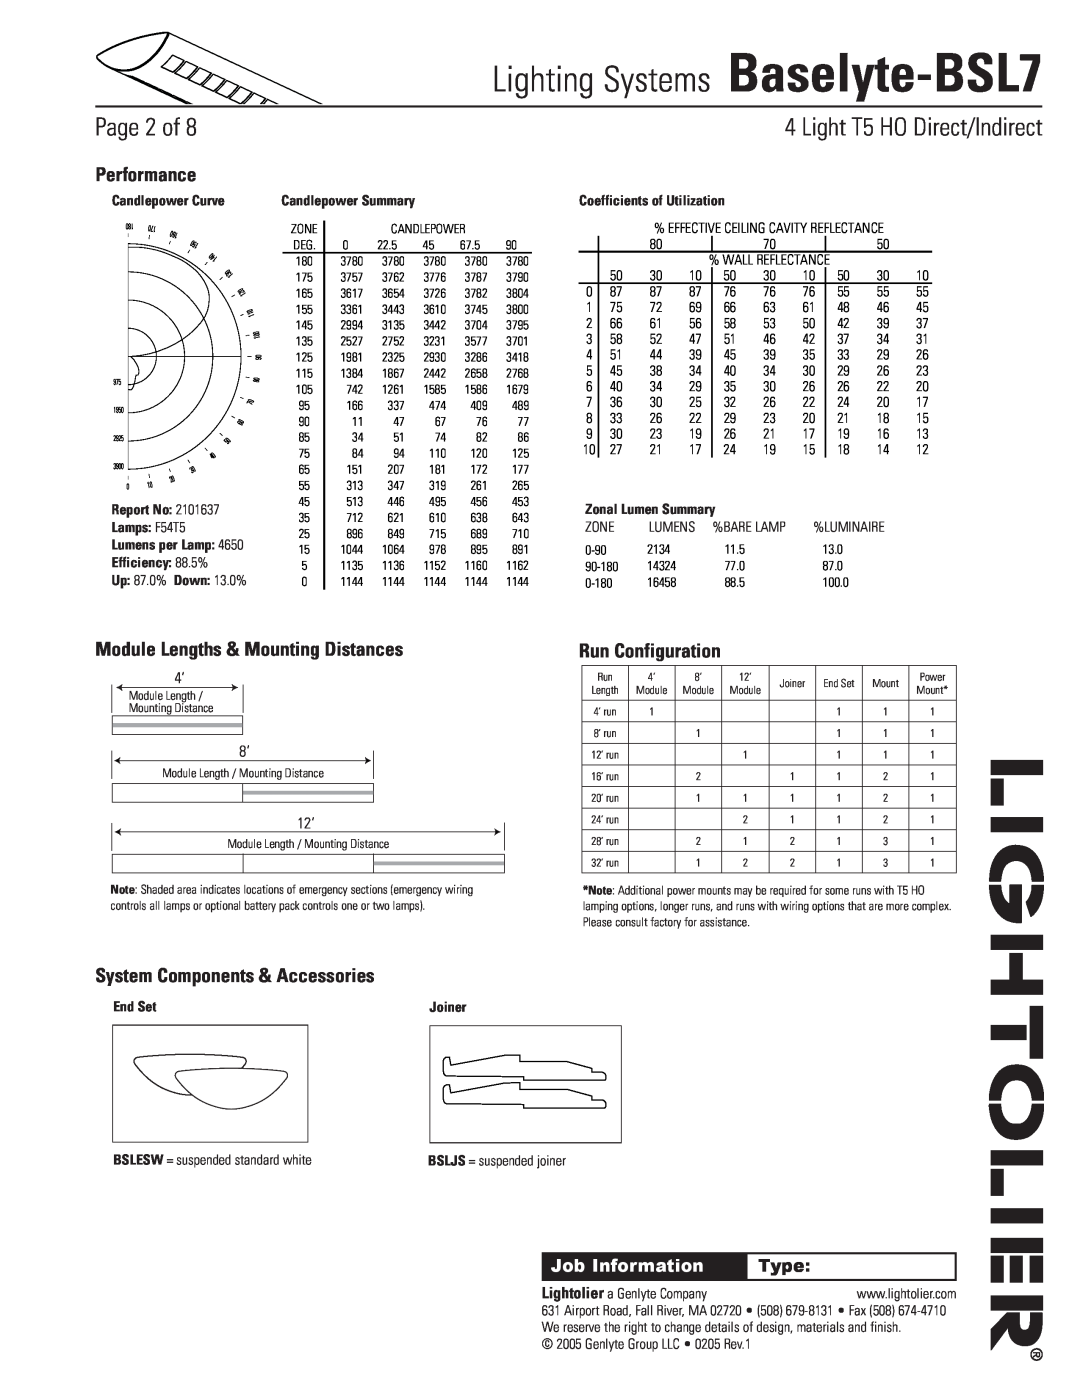 Lightolier Lighting Systems Baselyte-BSL7, Page of, Performance, Module Lengths & Mounting Distances, Run Configuration 